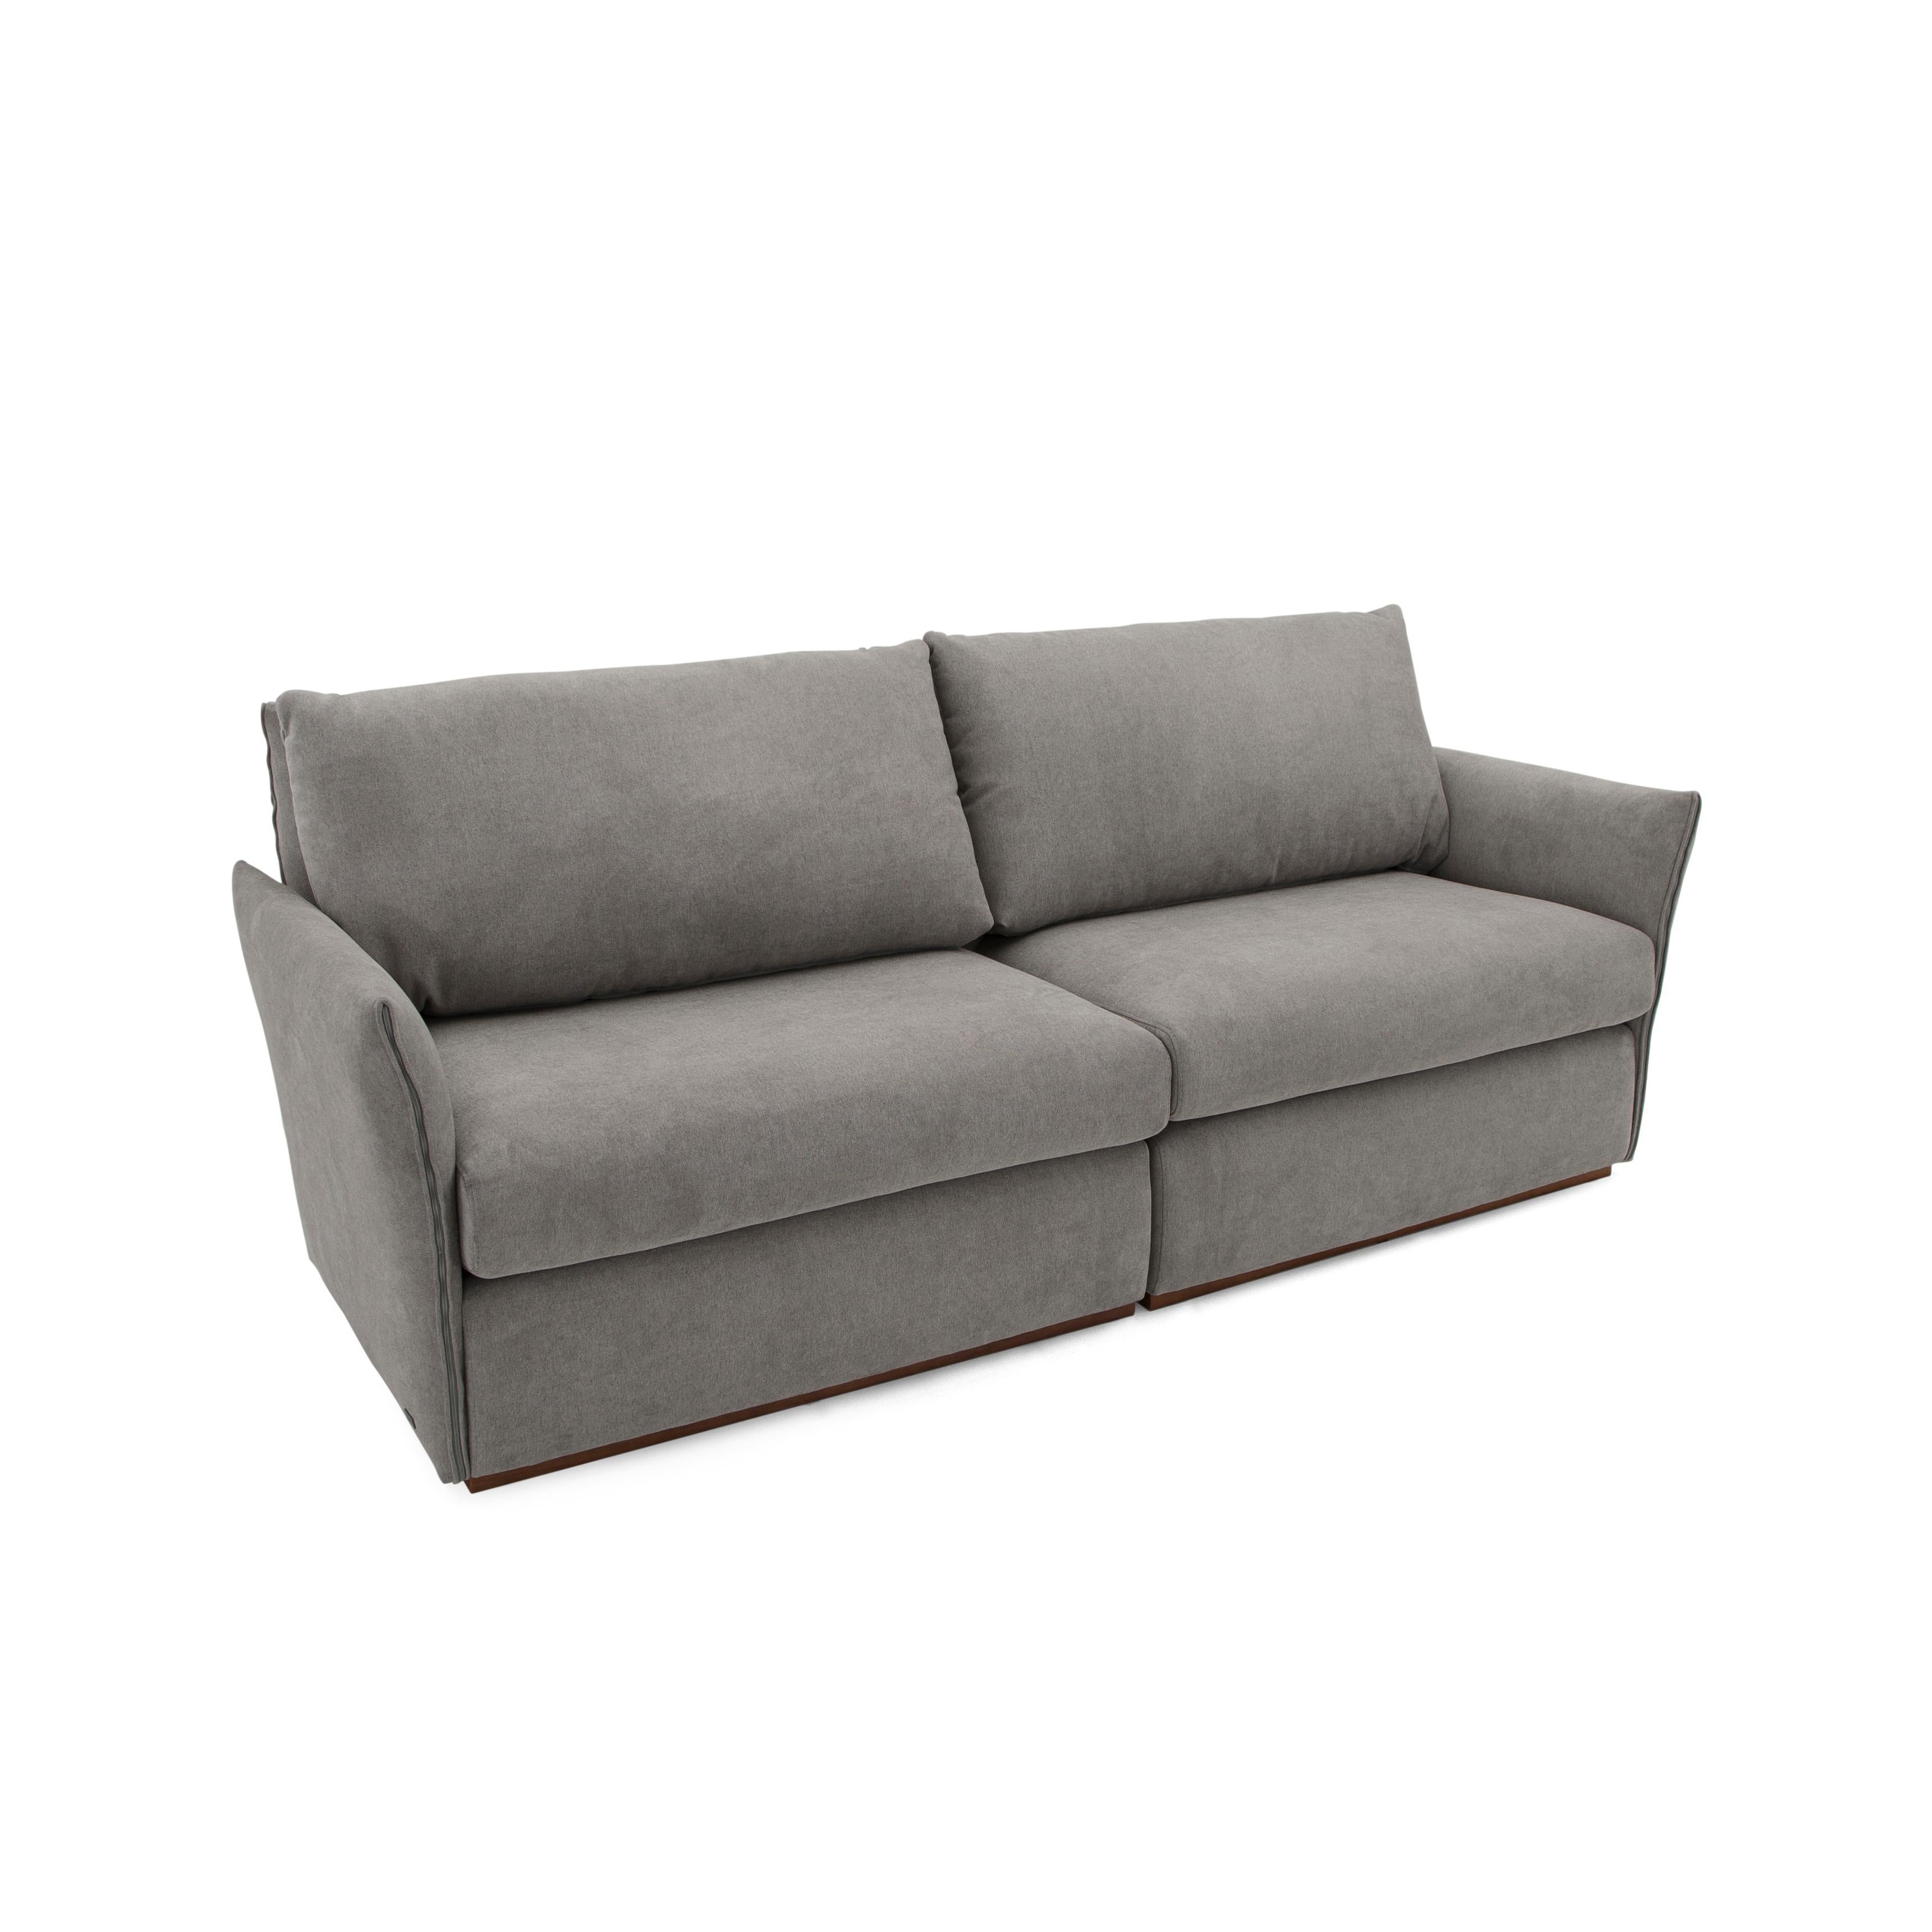 sofa connect uultis